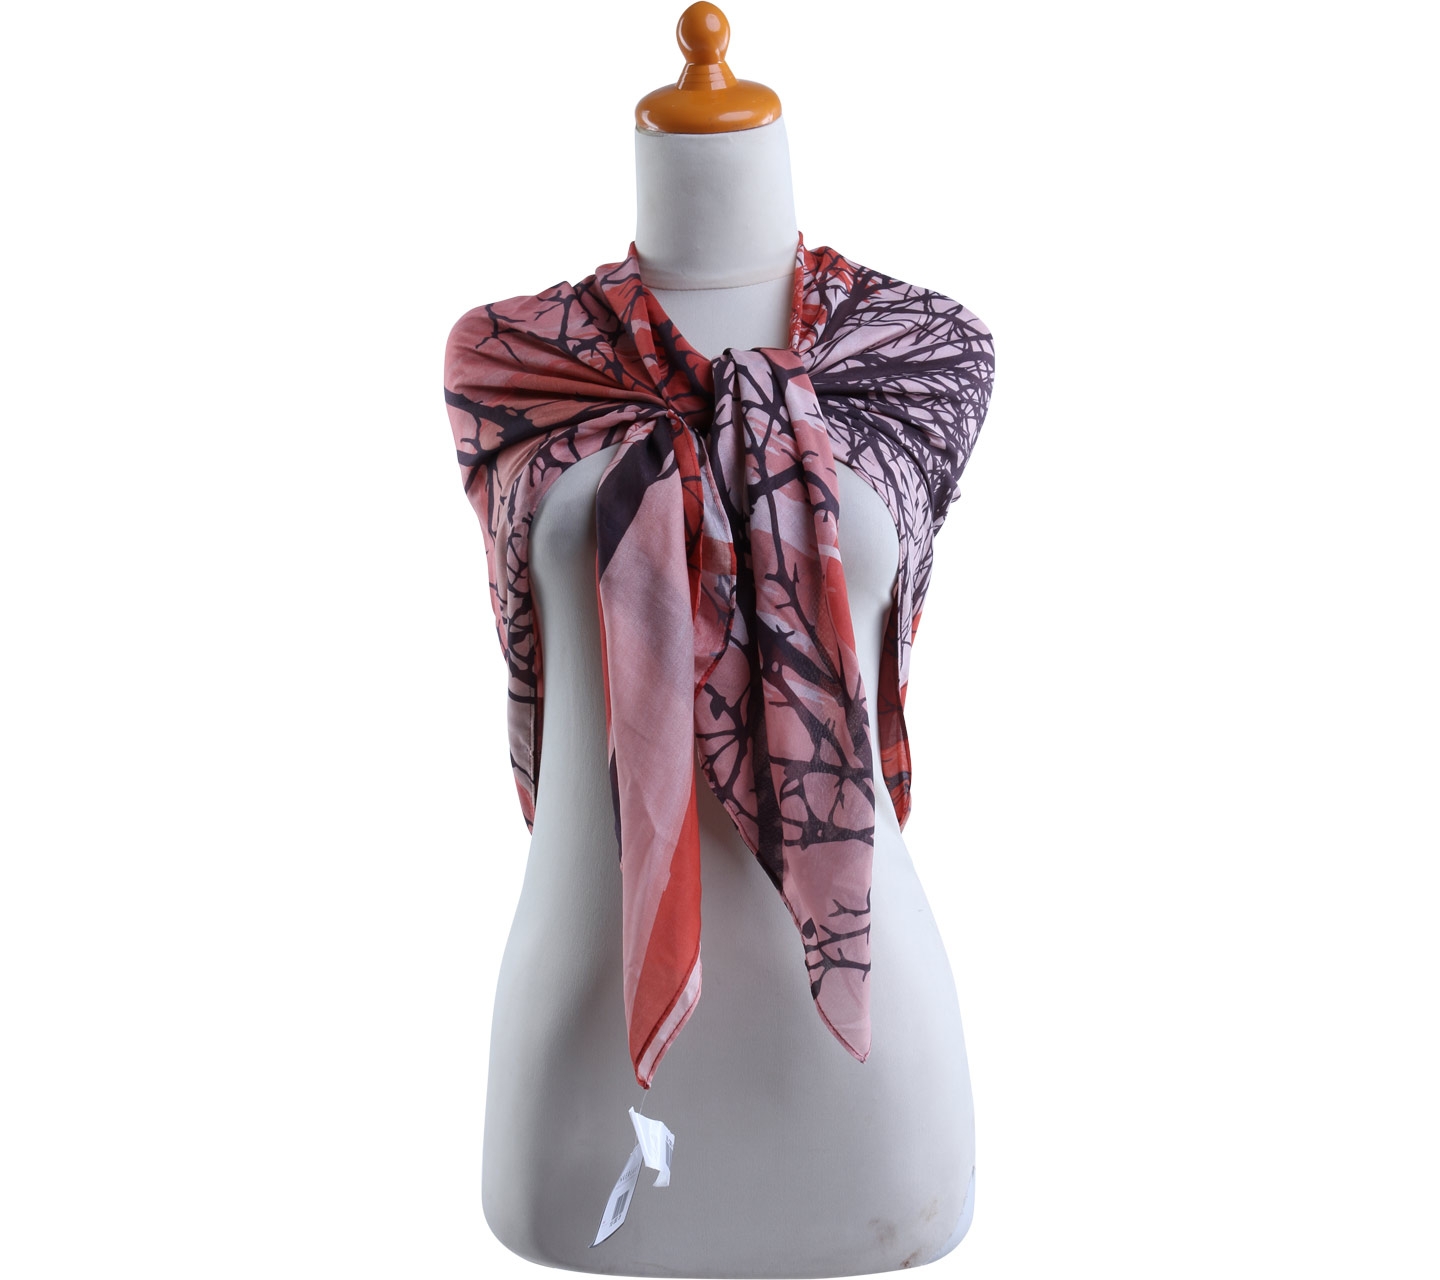 Hijup Multi Colour Patterned Scarf